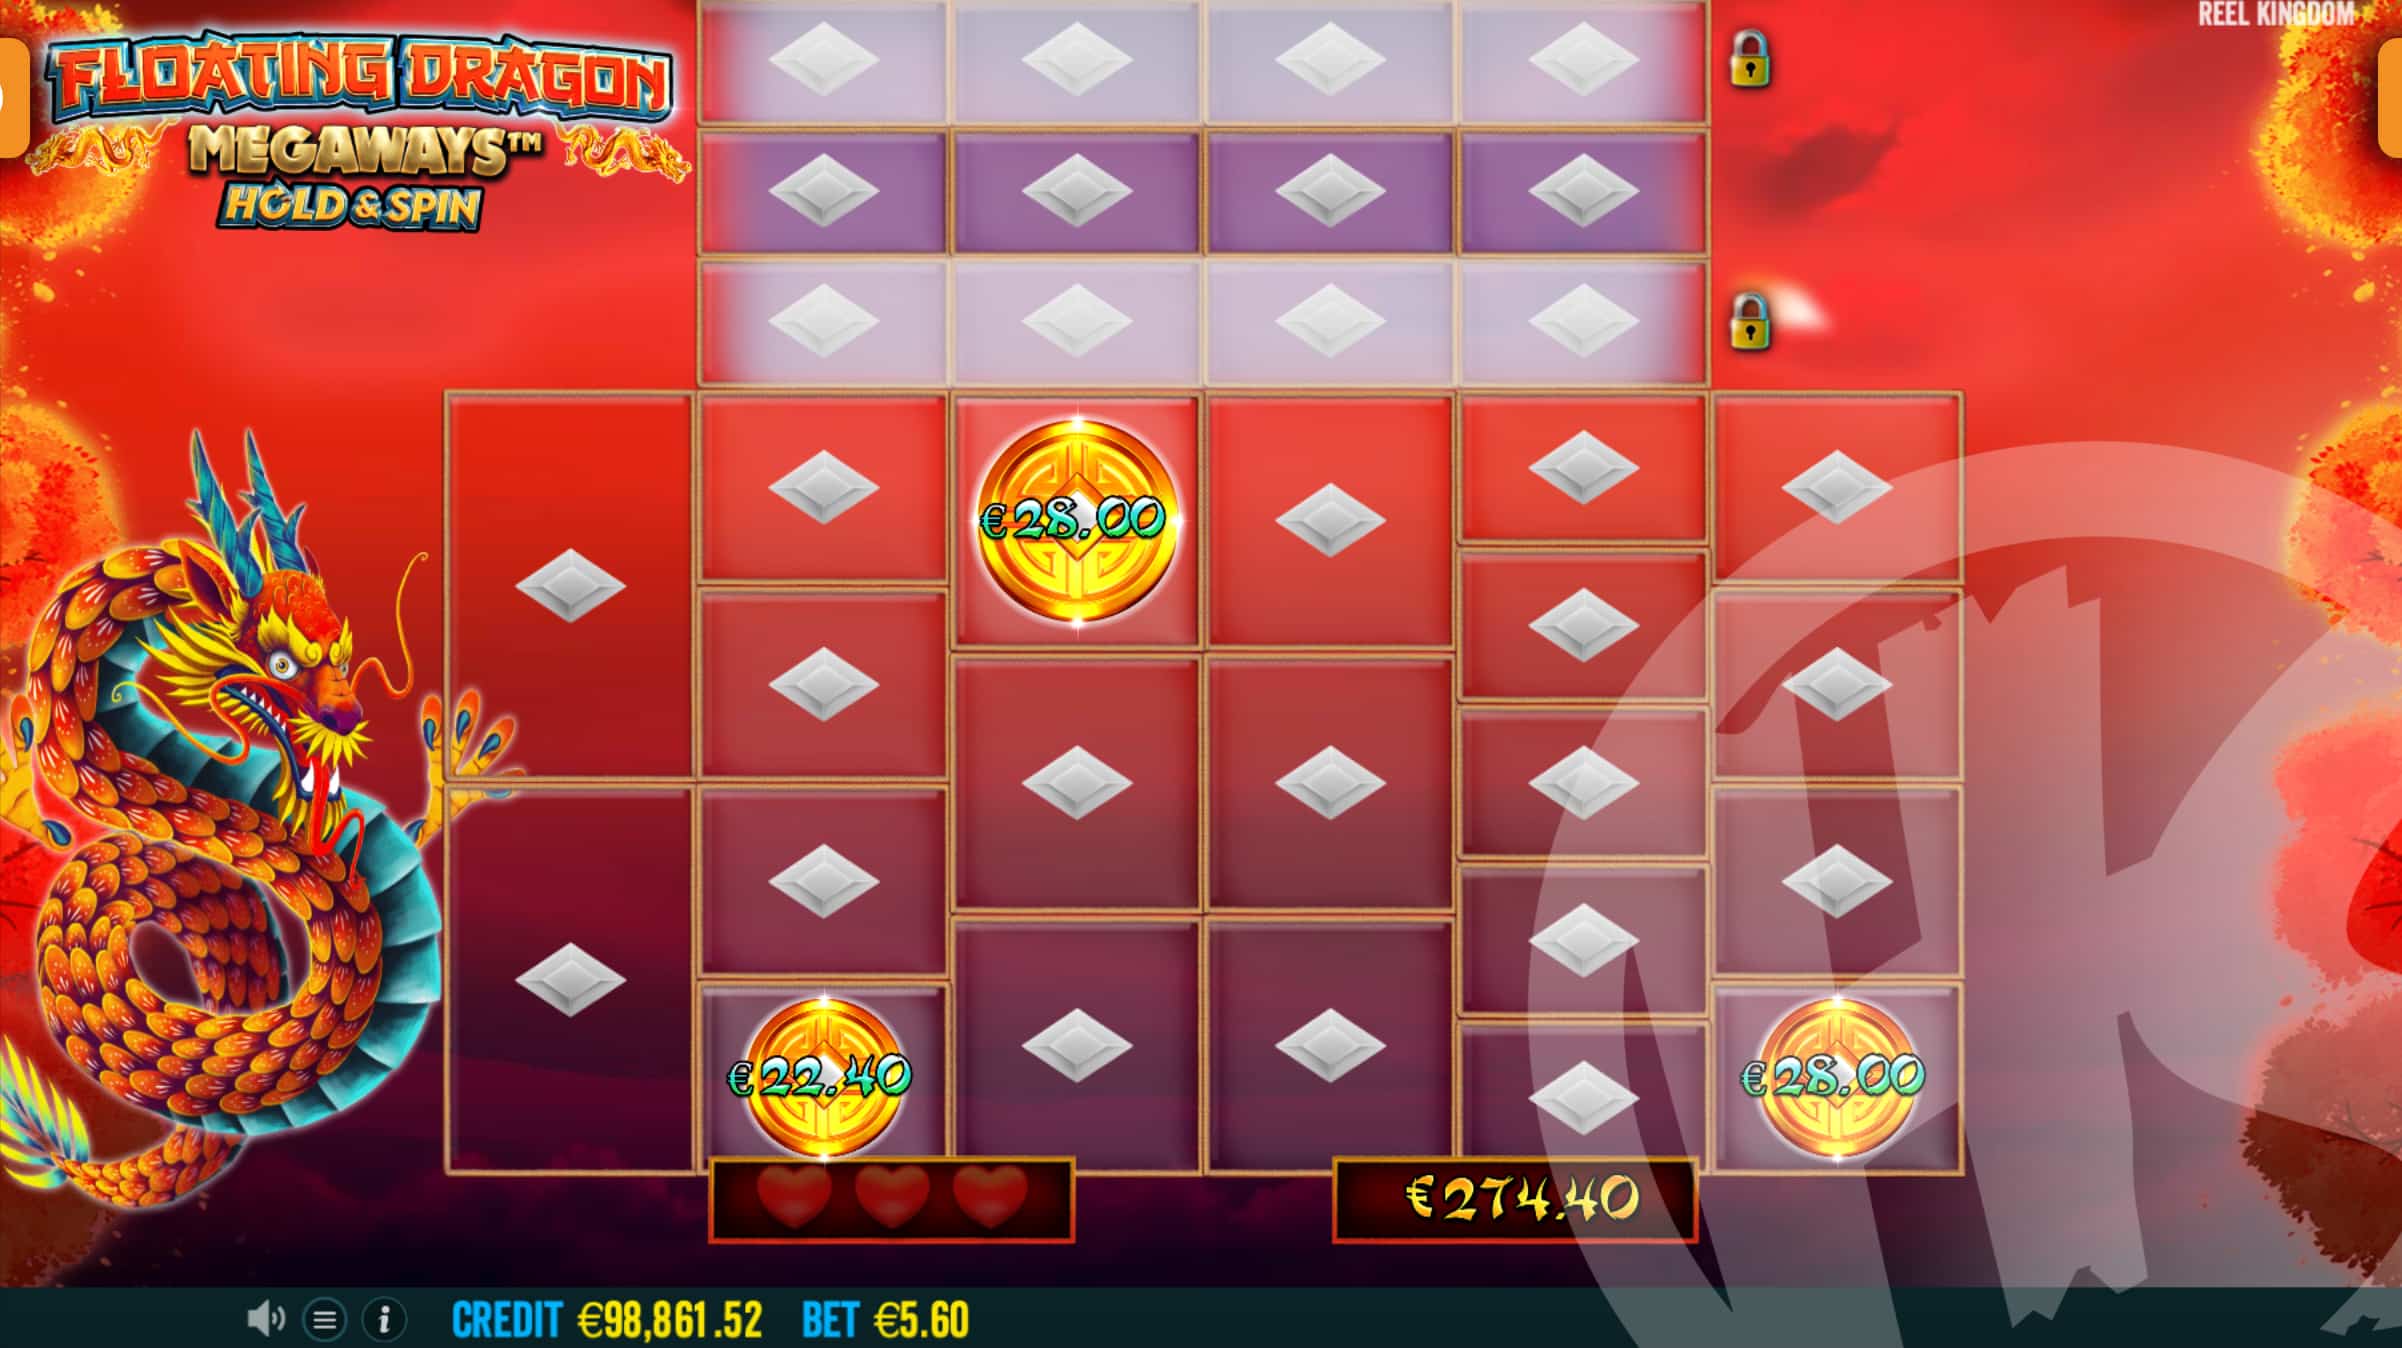 Land 3 or More Coins to Trigger the Hold & Spin Feature